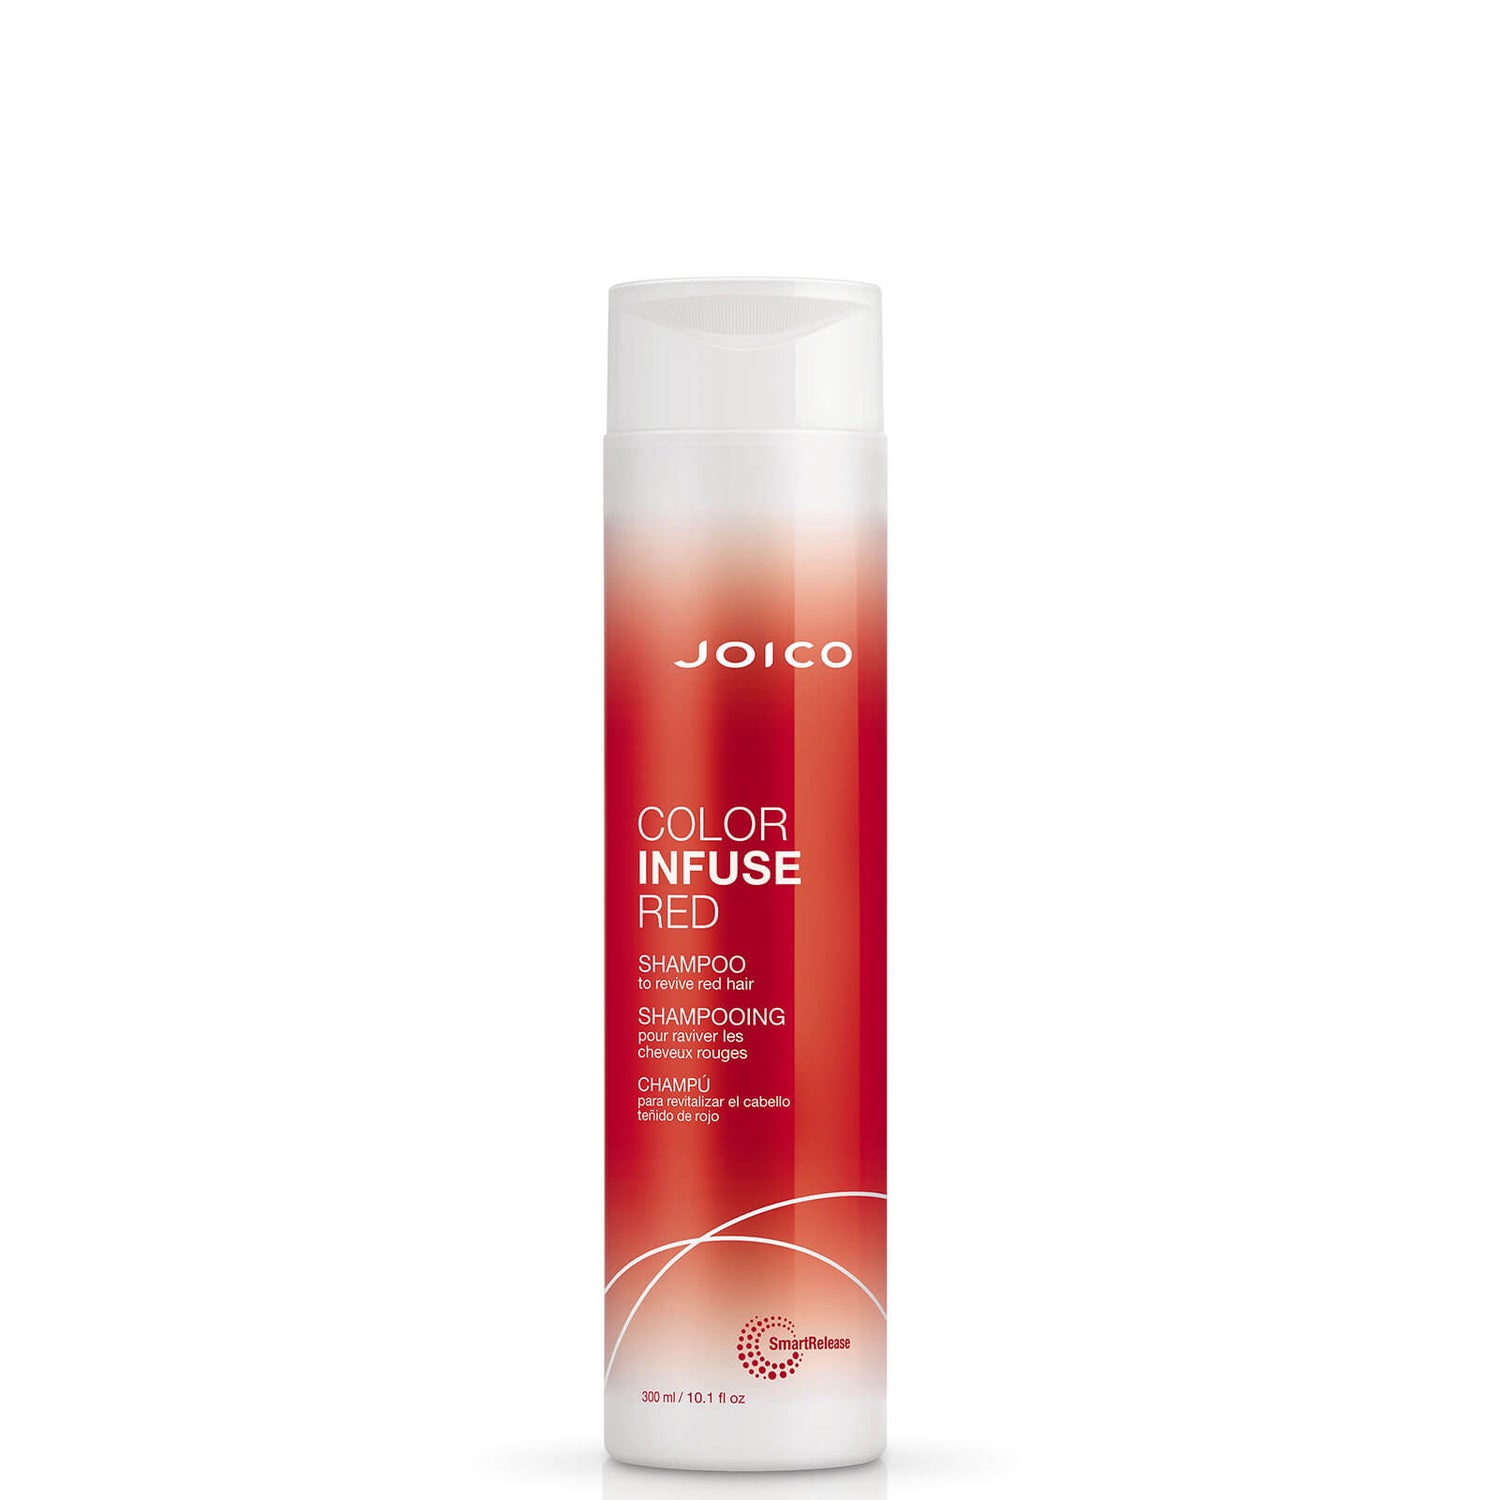 Joico Color Infuse Red Shampoo 300 ml